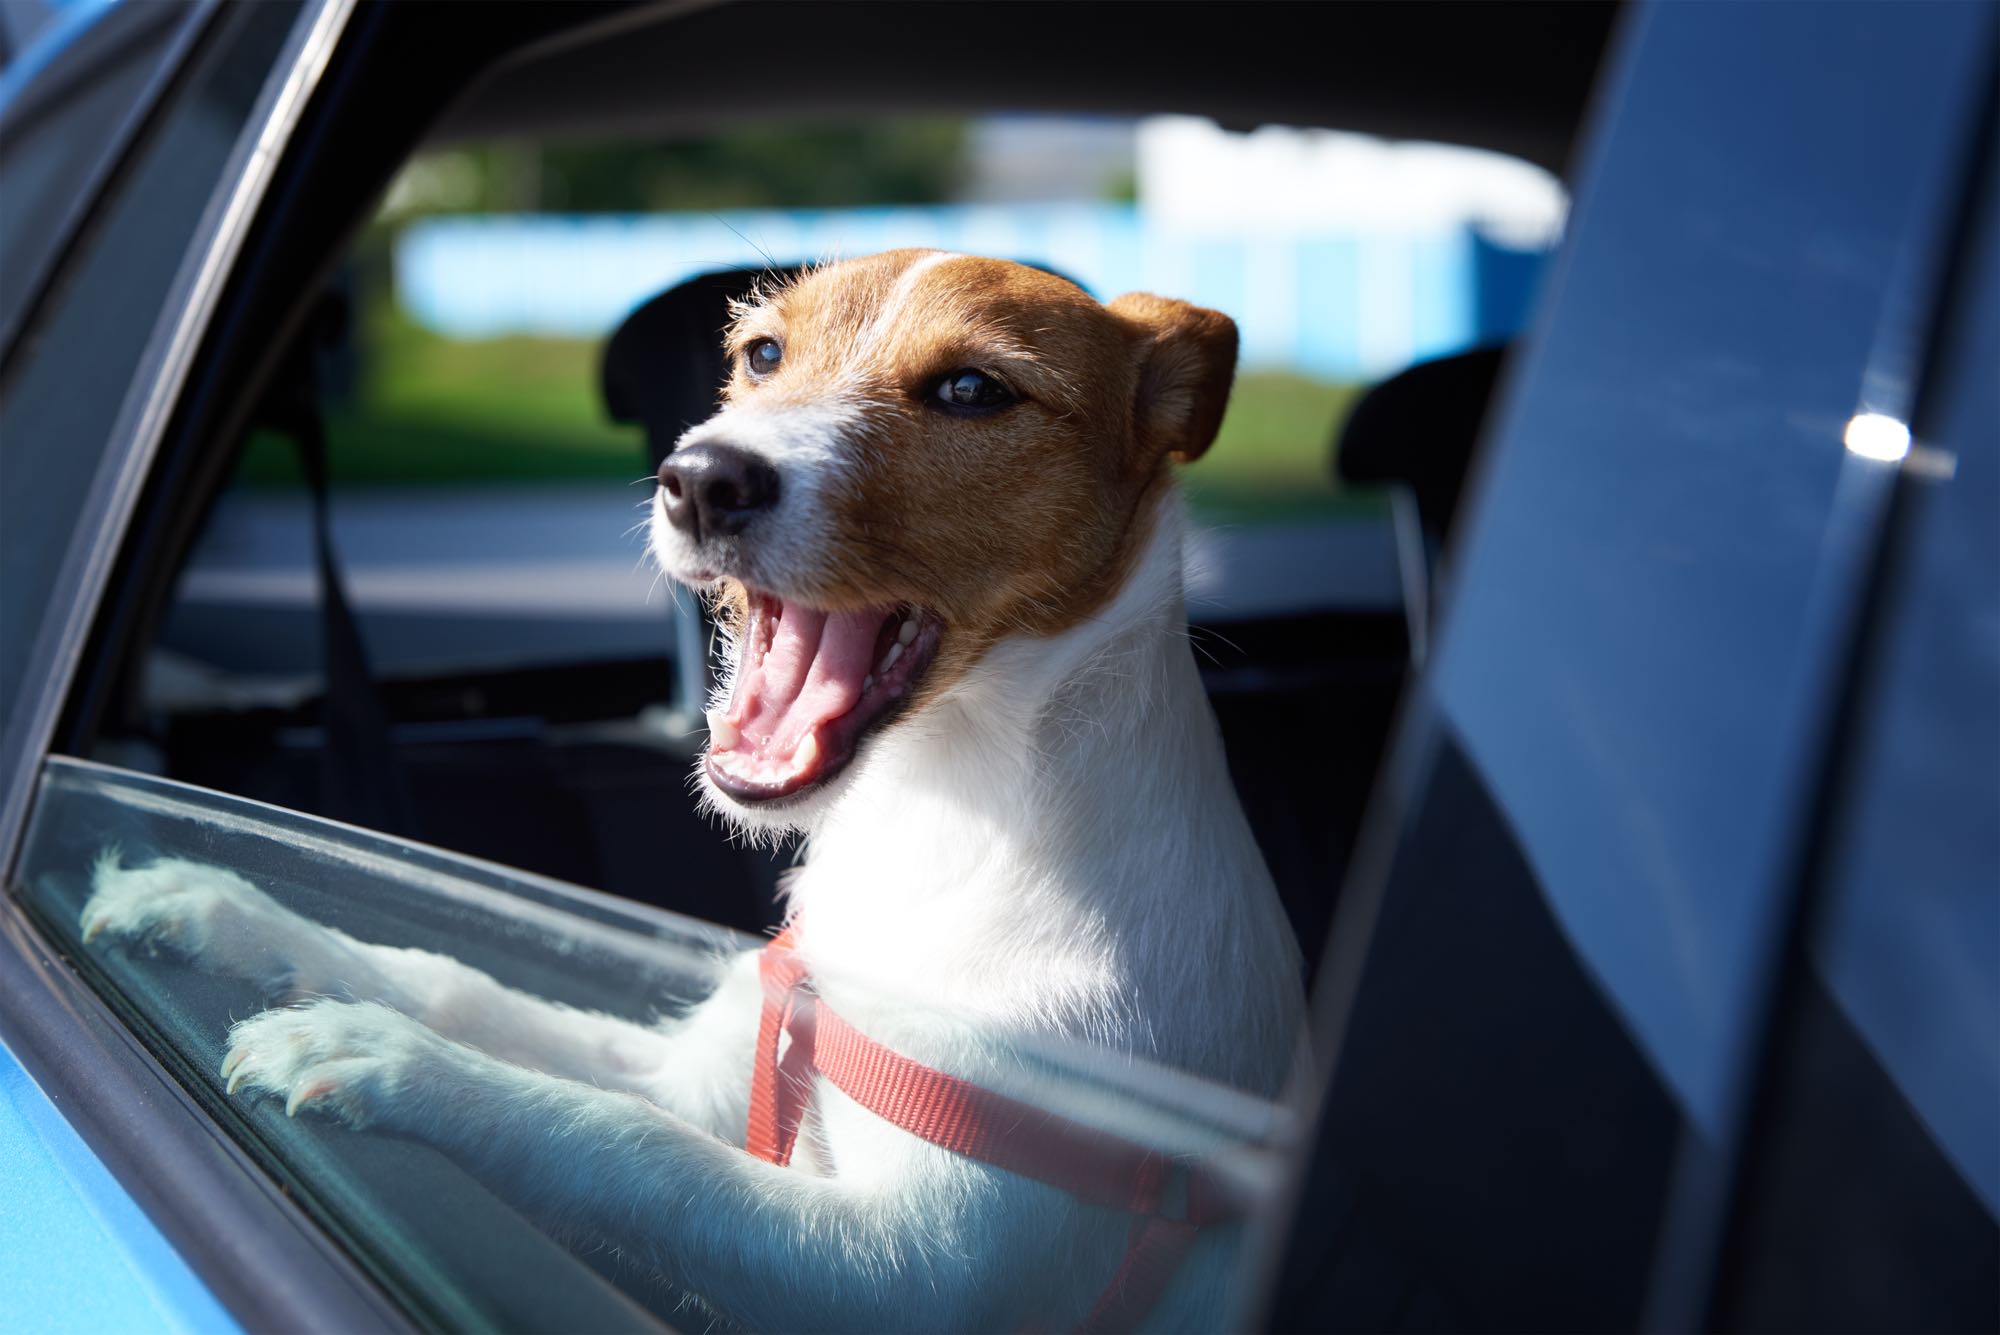 dog-looking-out-of-car-window-2022-03-15-05-51-51-utc